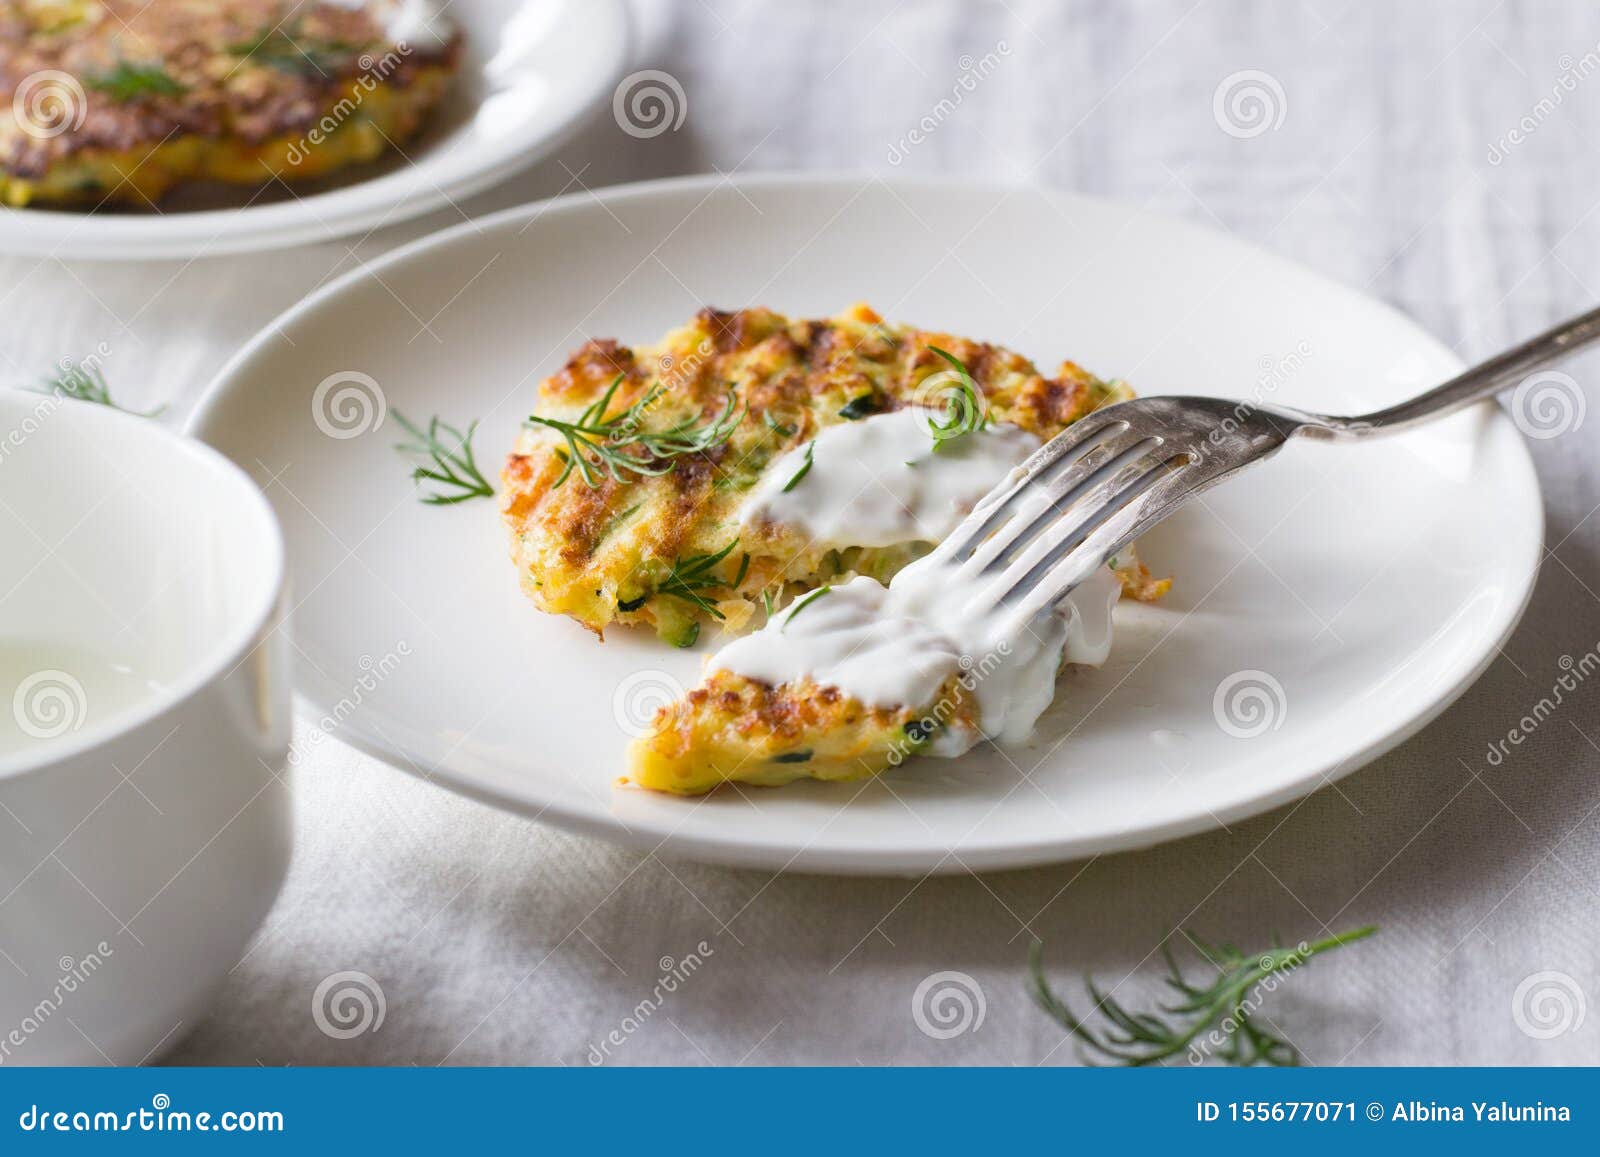 zucchini, carrot, parmesan fritters with dill and yogur